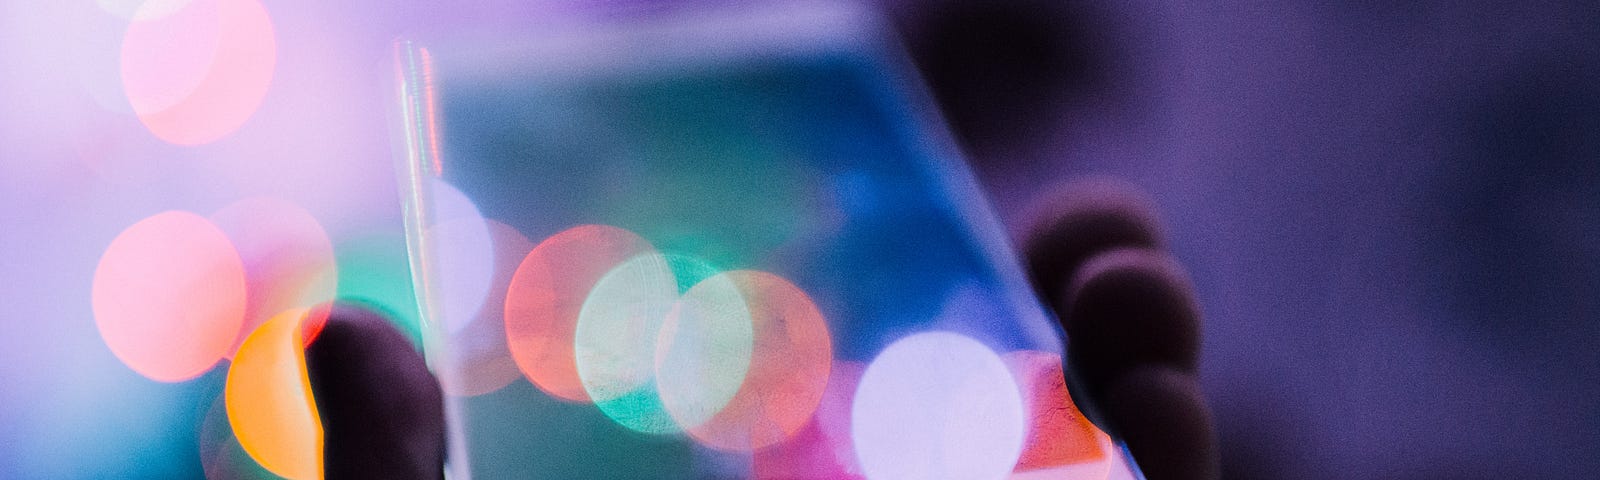 A person holding a phone in their hand with lights blurring across the screen and into the distance of an out-of-focus background